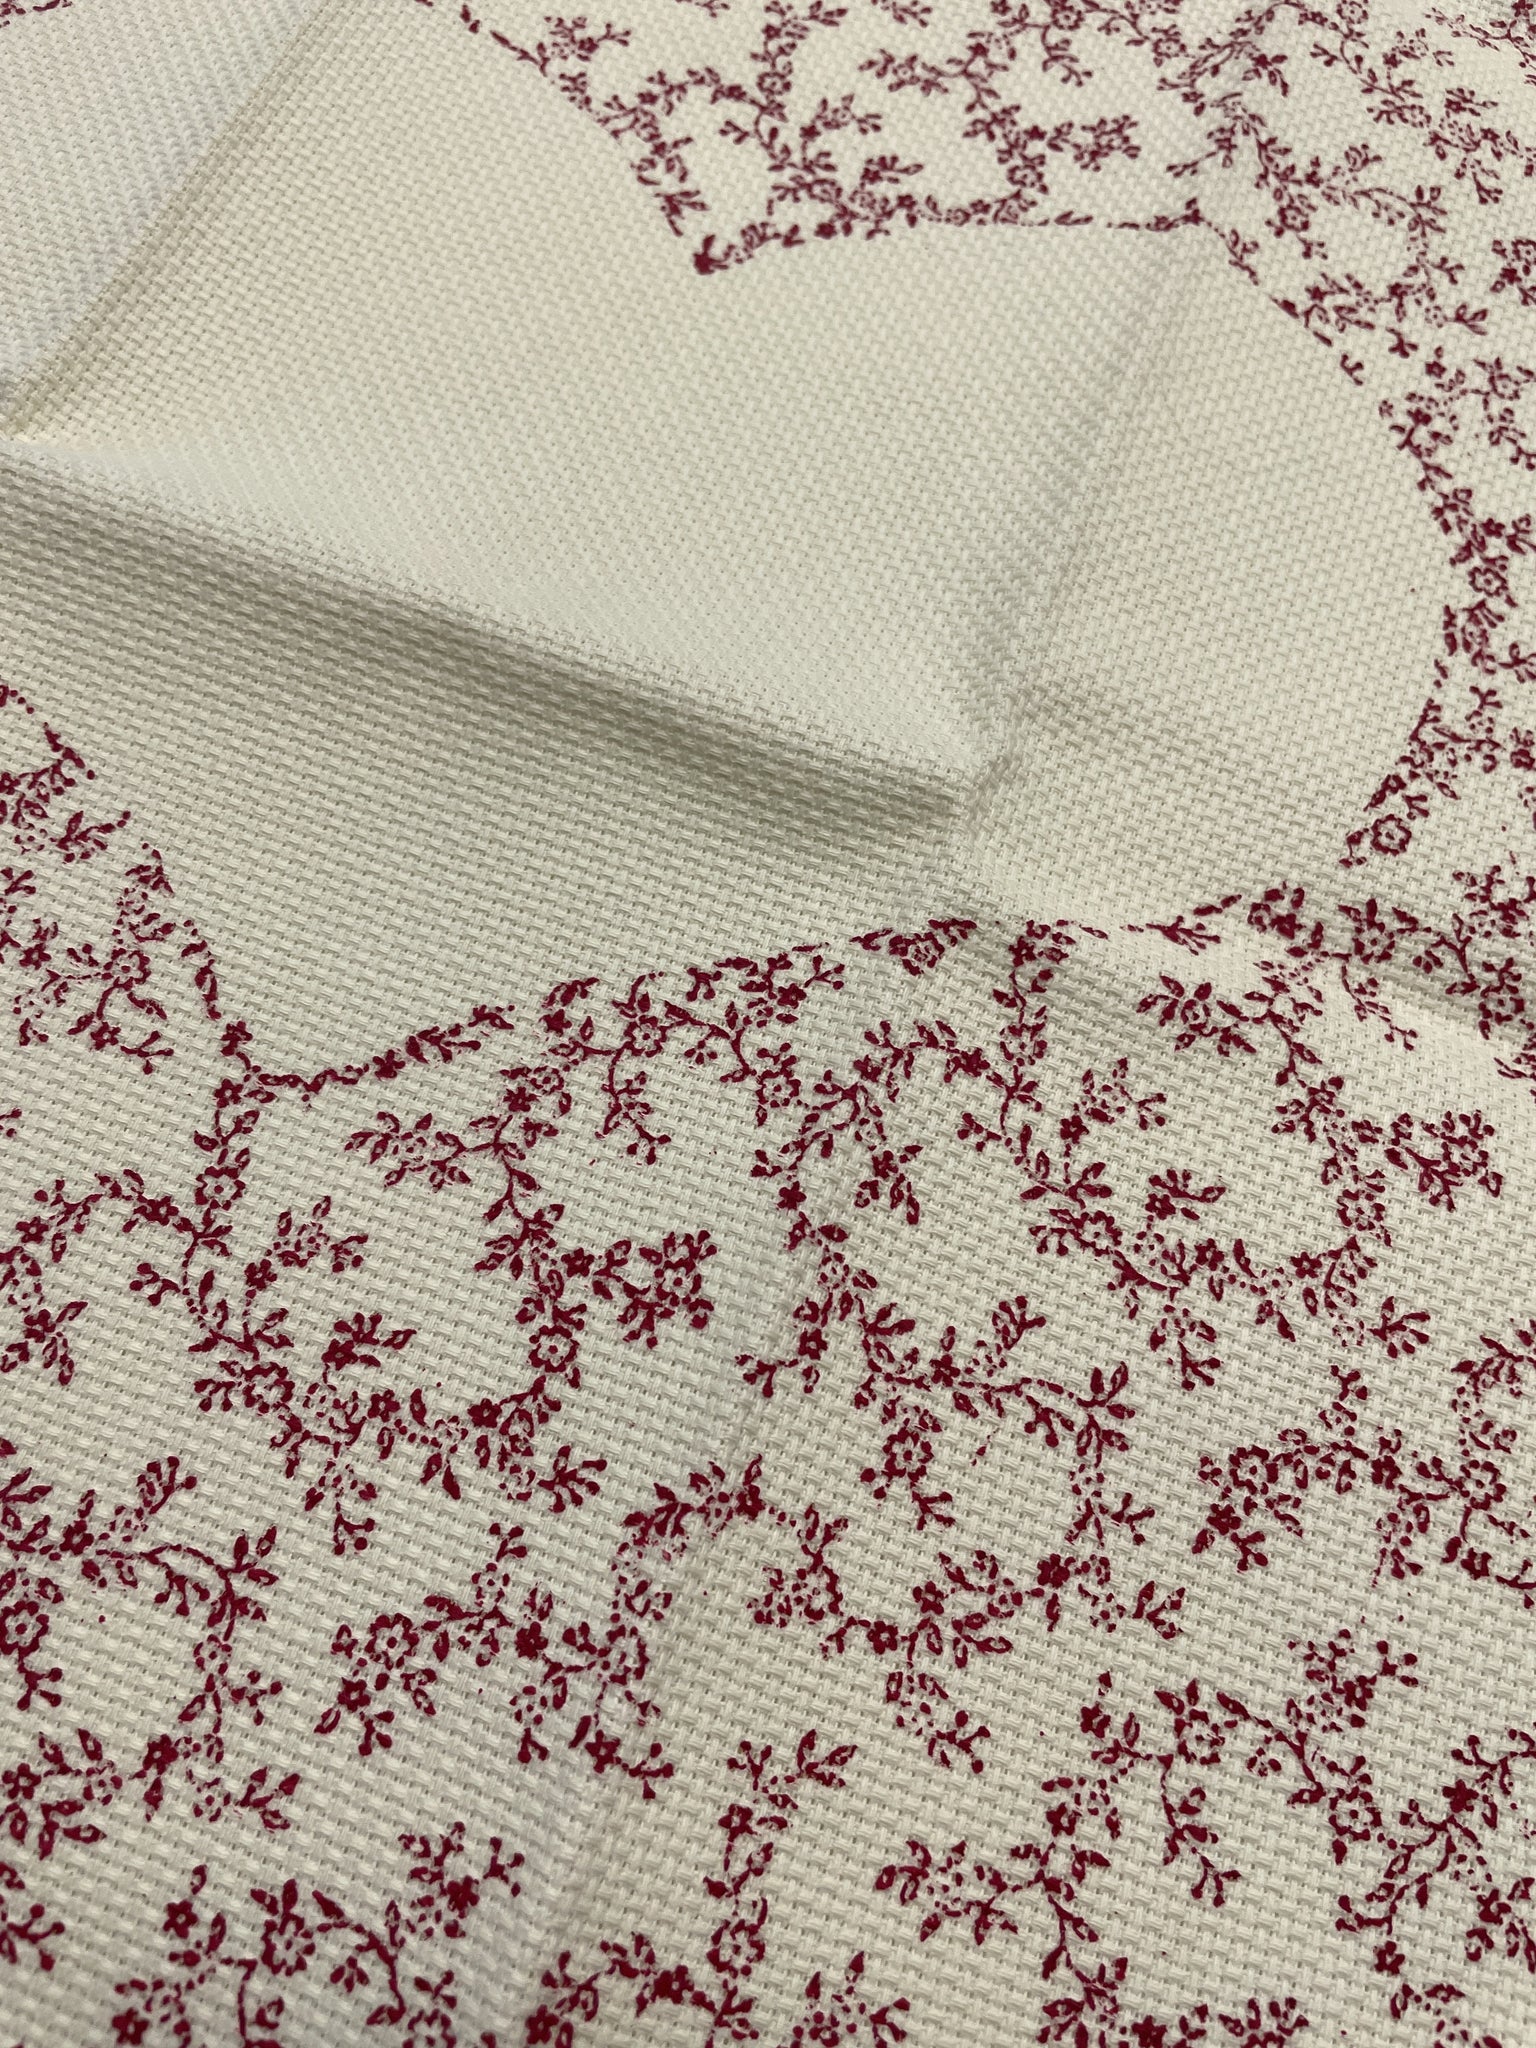 Aida Cloth #14 - Off White Printed with Red Flowers